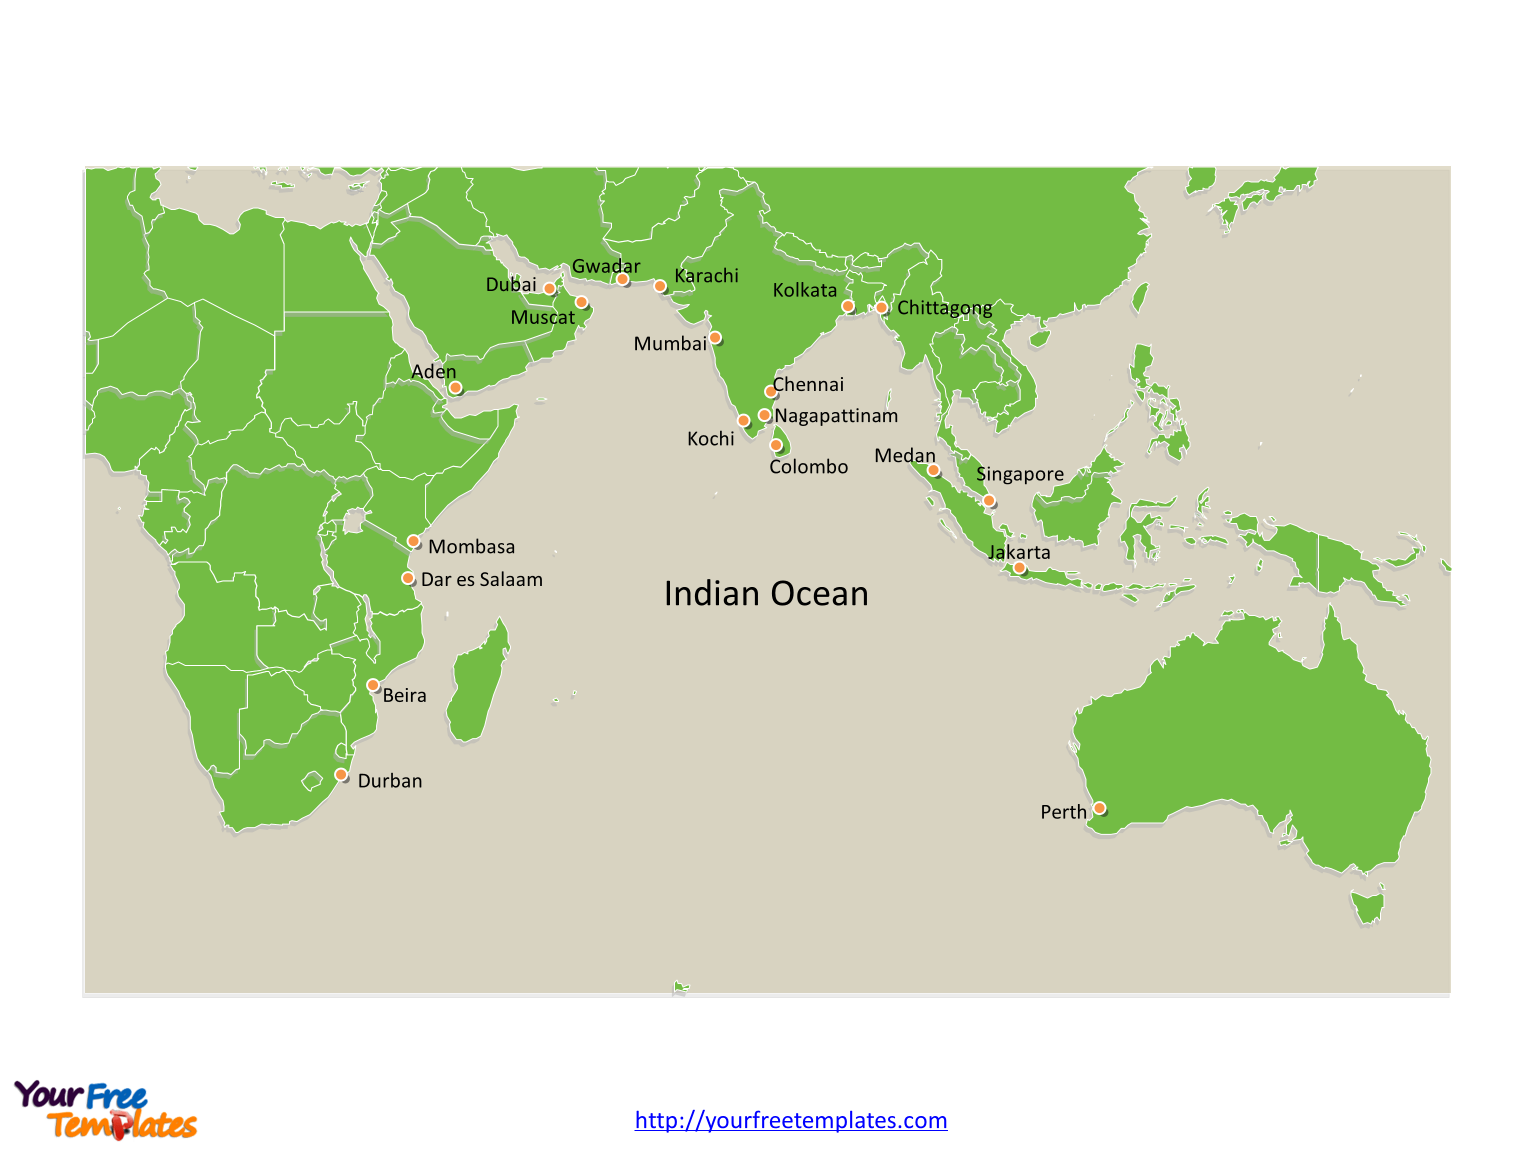 Indian Ocean map labeled major cities